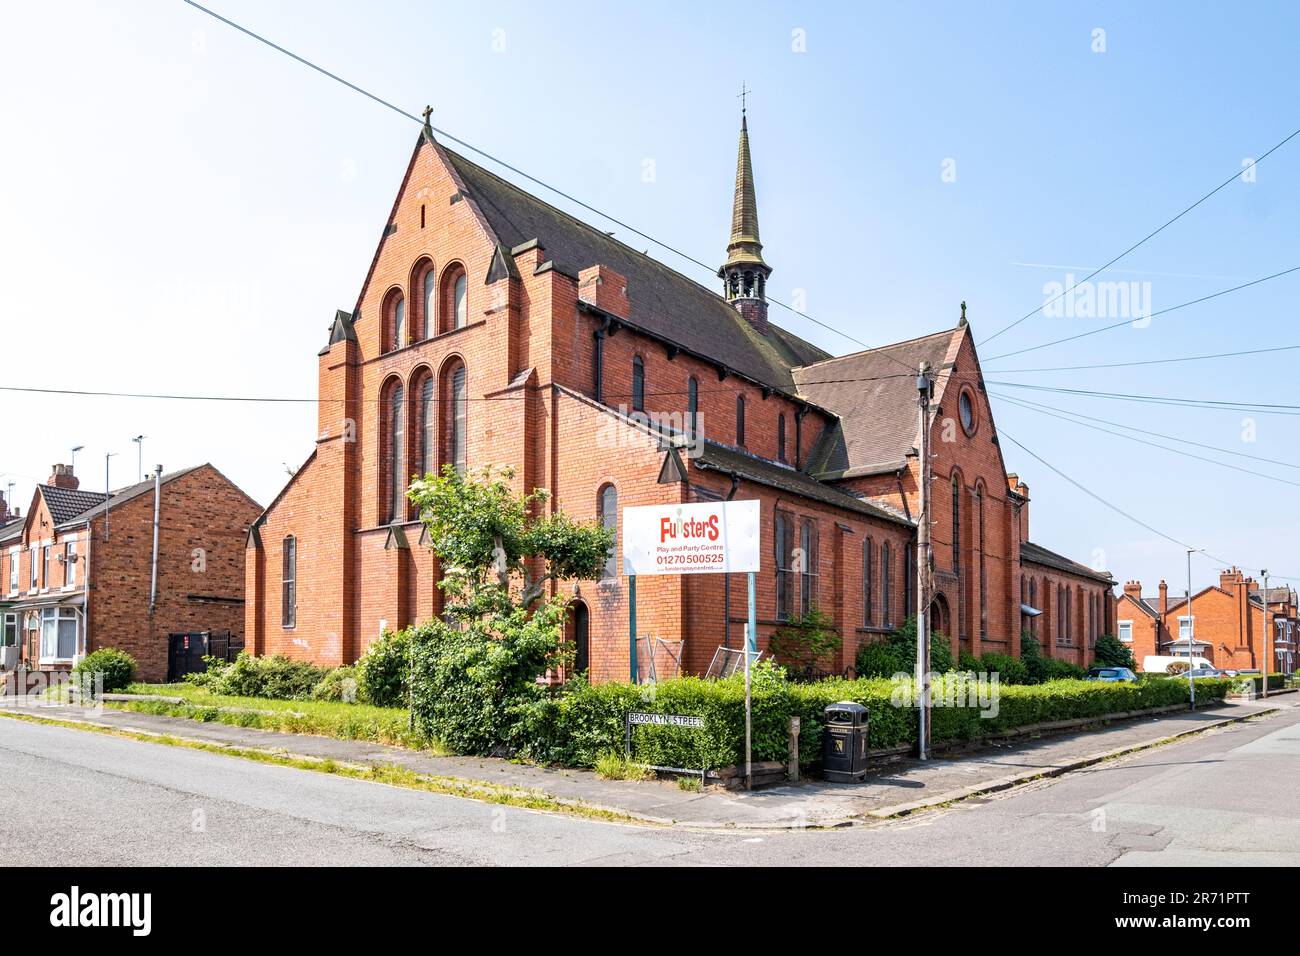 Funsters play centre, formerly St John's Baptist church in Crewe Cheshire UK Stock Photo